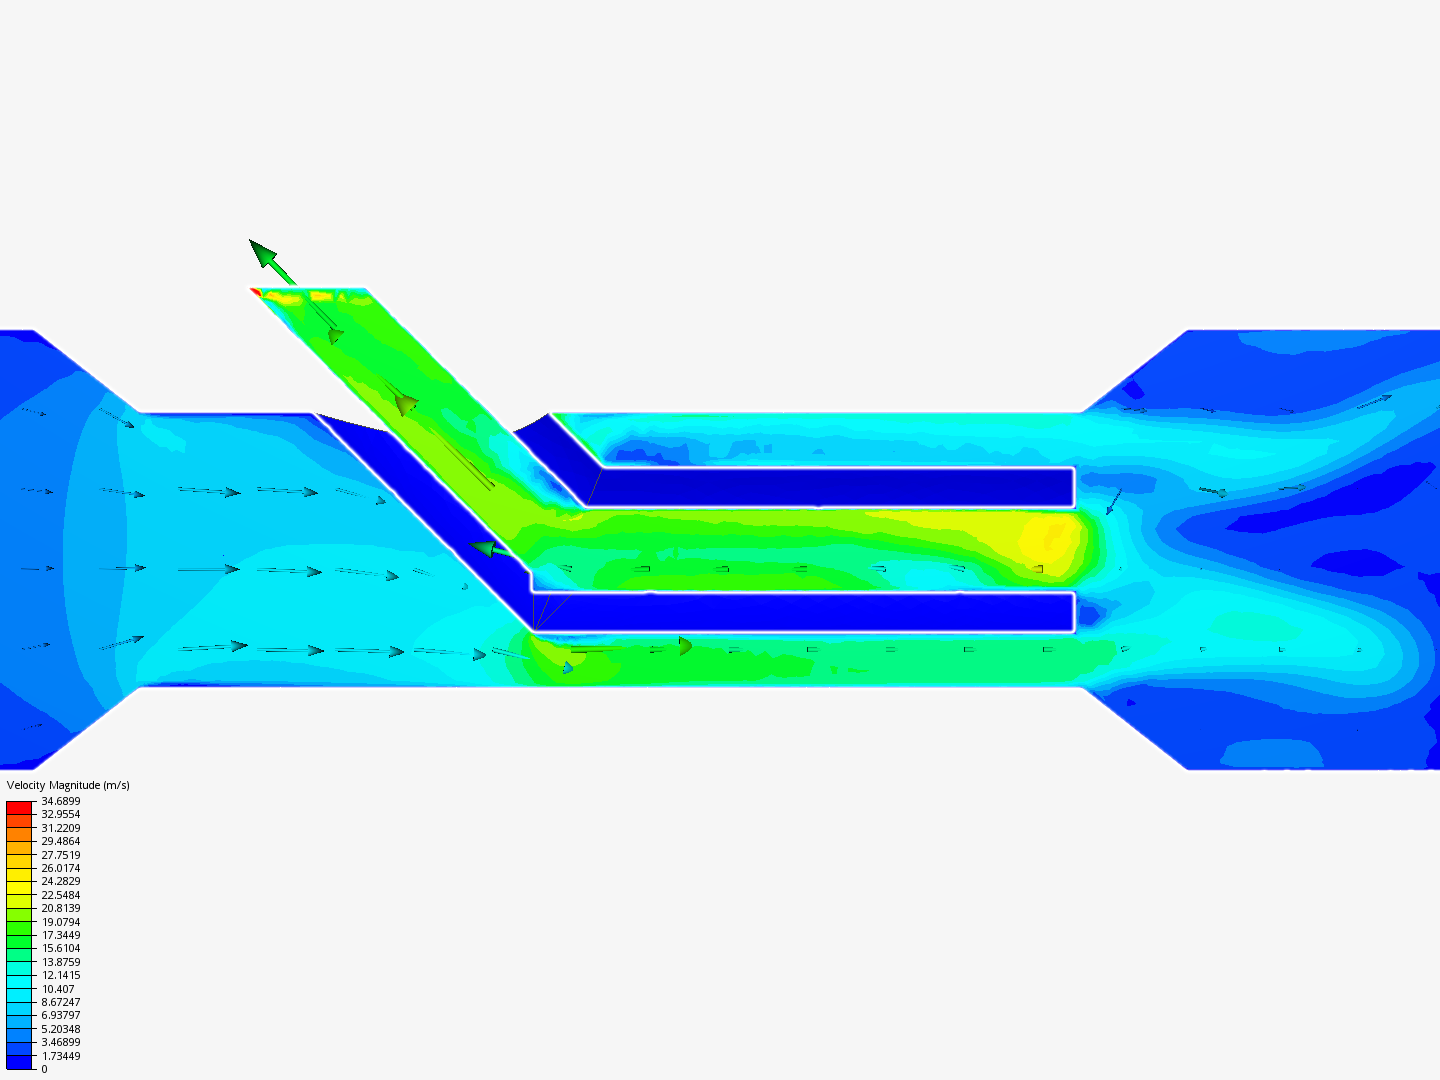 Inductor jet image